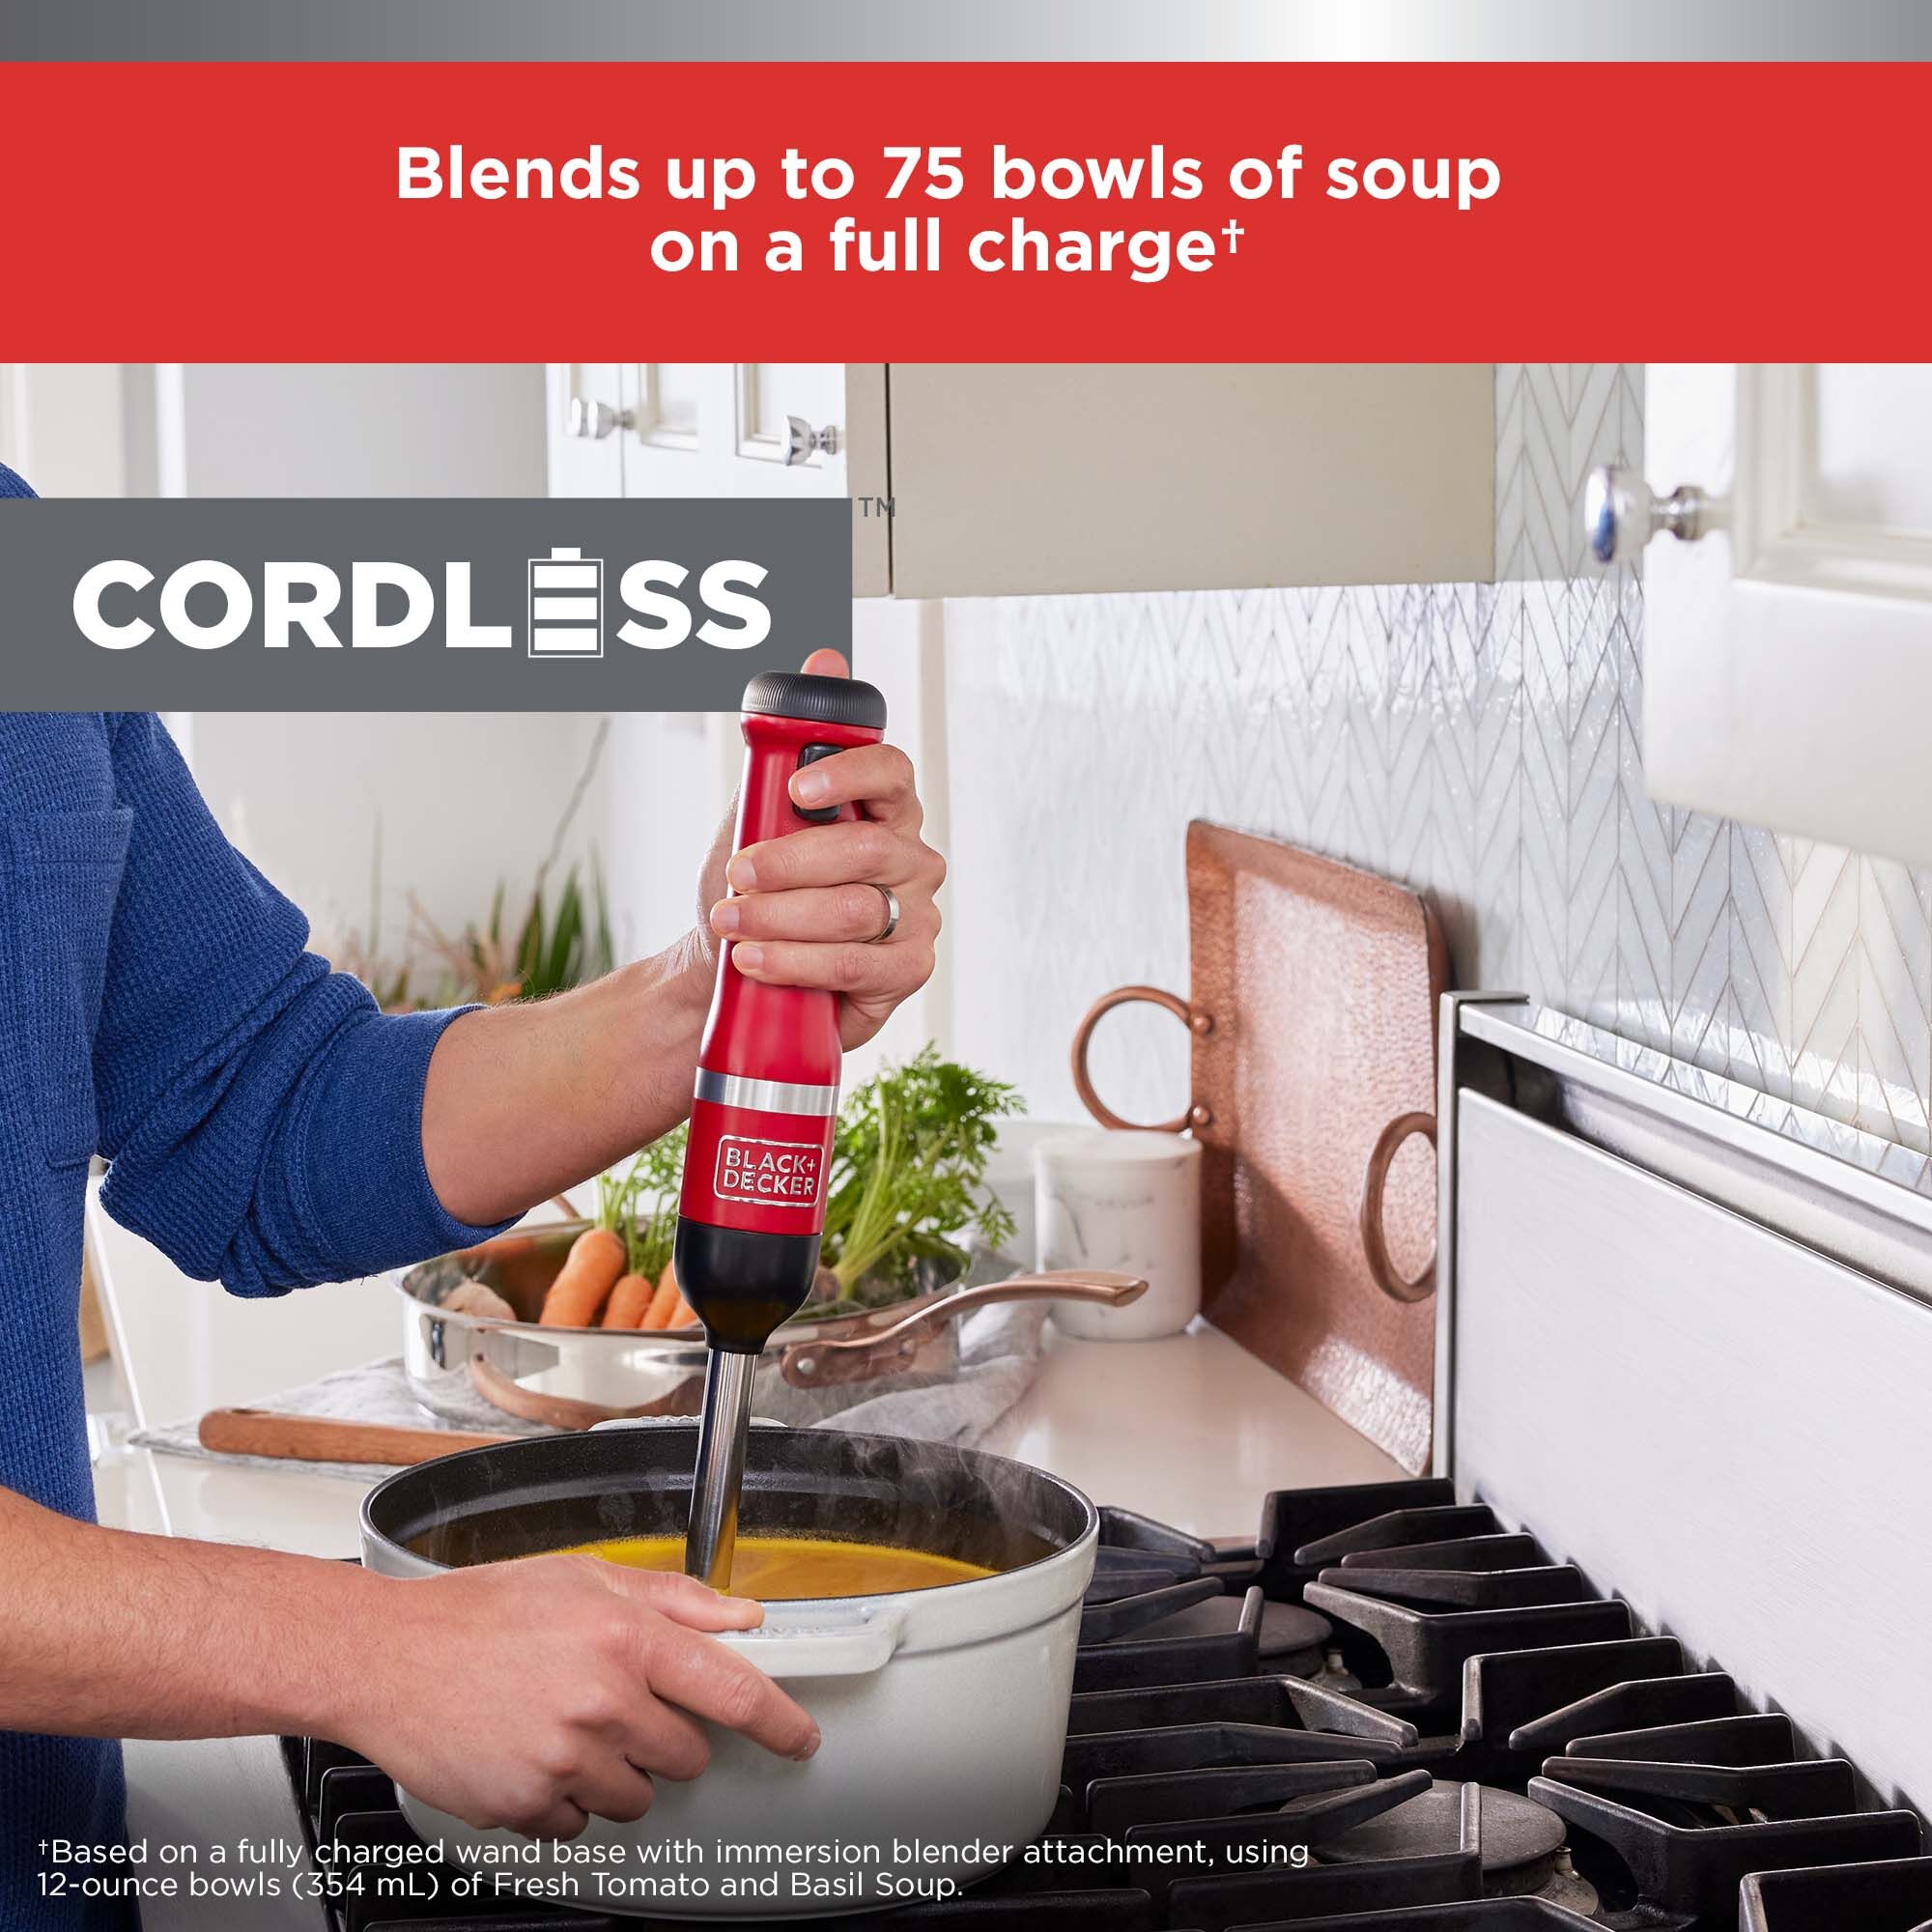 BLACK+DECKER kitchen wand™ immersion blender blends up to 75 bowls of soup on a full charge